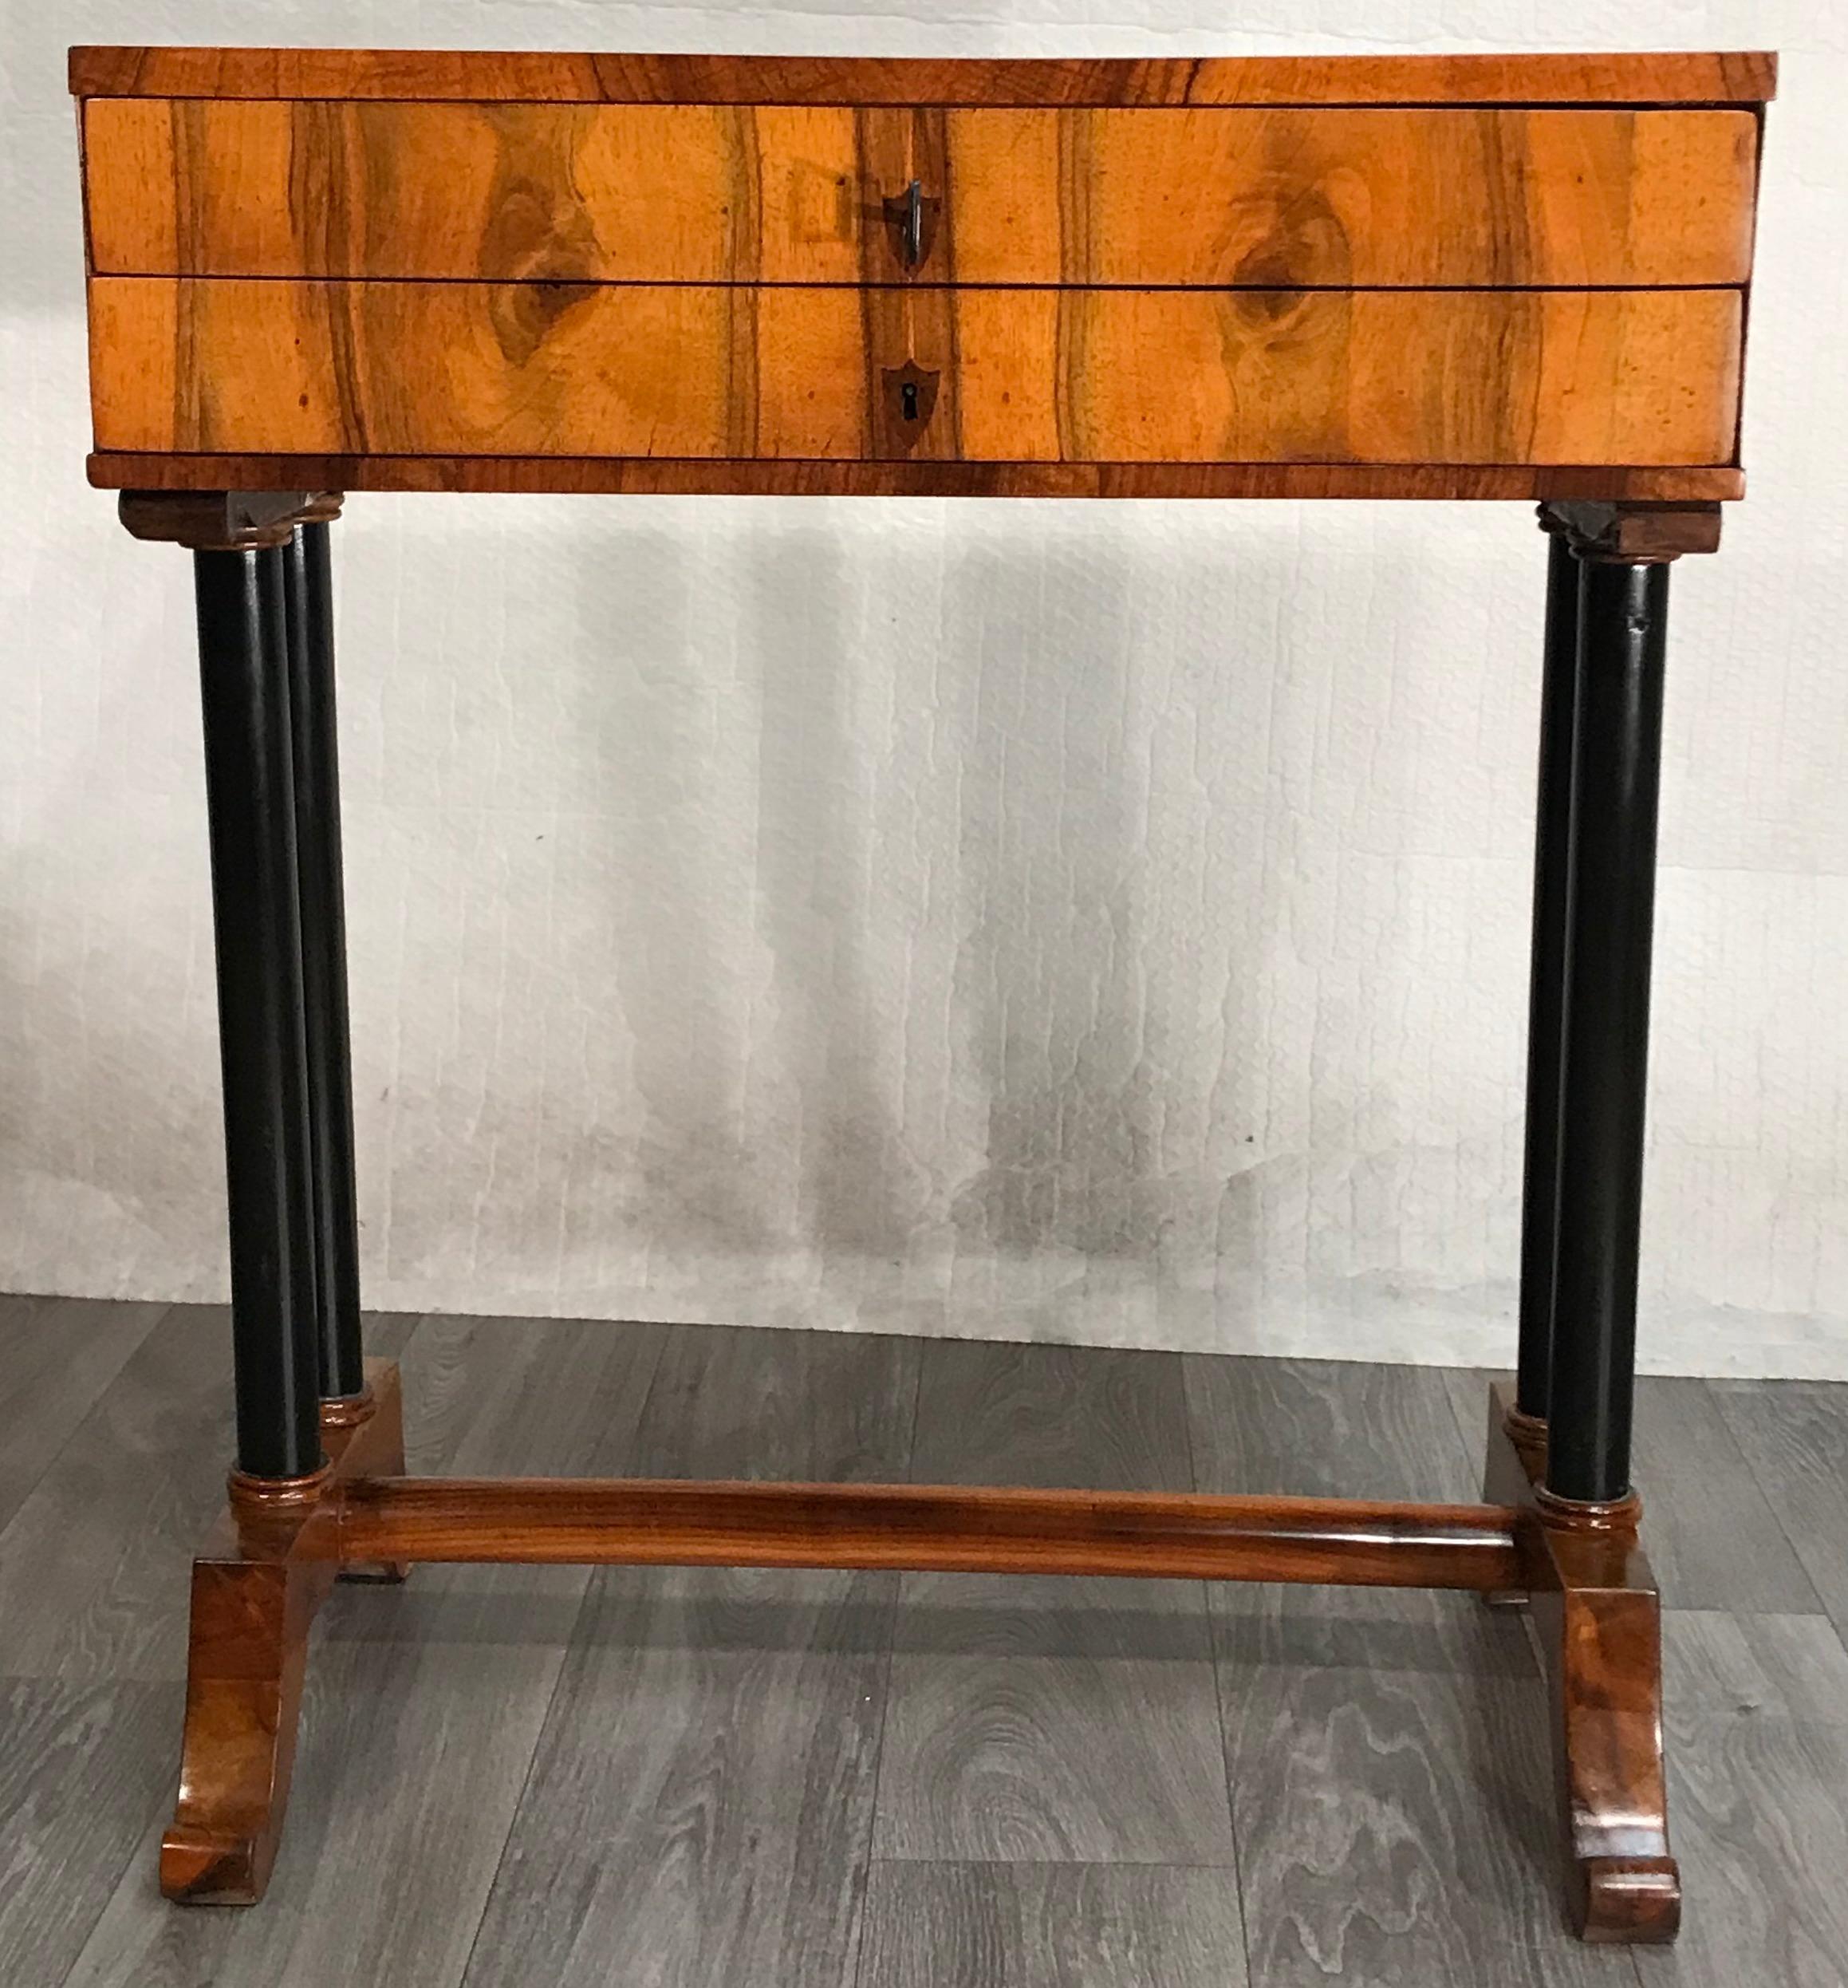 Biedermeier side- or sewing table, South German 1815, walnut veneer. 
This classic unique Biedermeier table has two ebonized columns on each side, which stand on a walnut base connected with a stretcher. The plain rectangular top has two drawers.